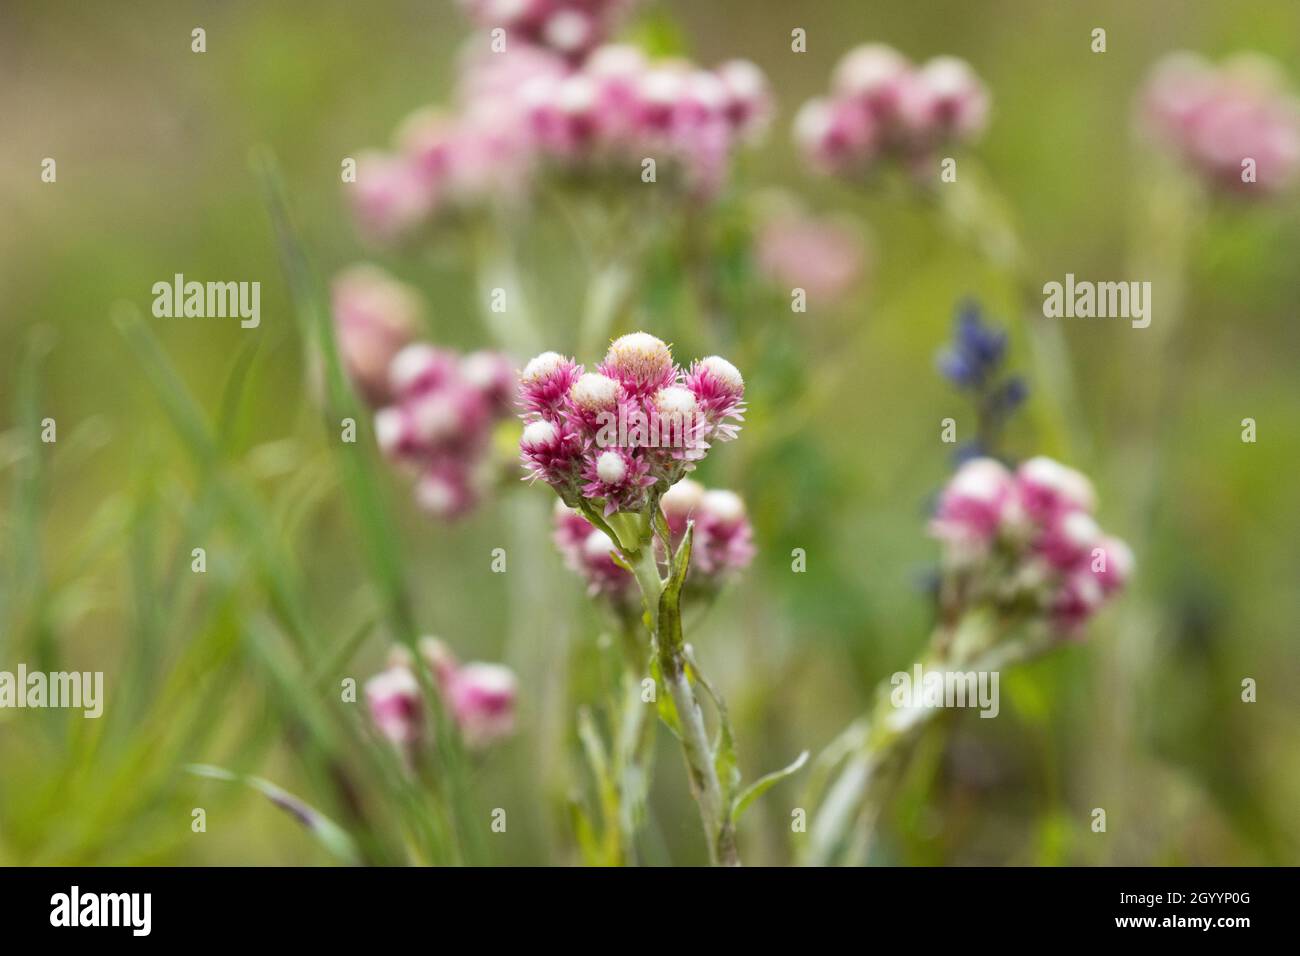 A small blooming pink Catsfoot, Antennaria dioica flower in Northern Europe. Stock Photo